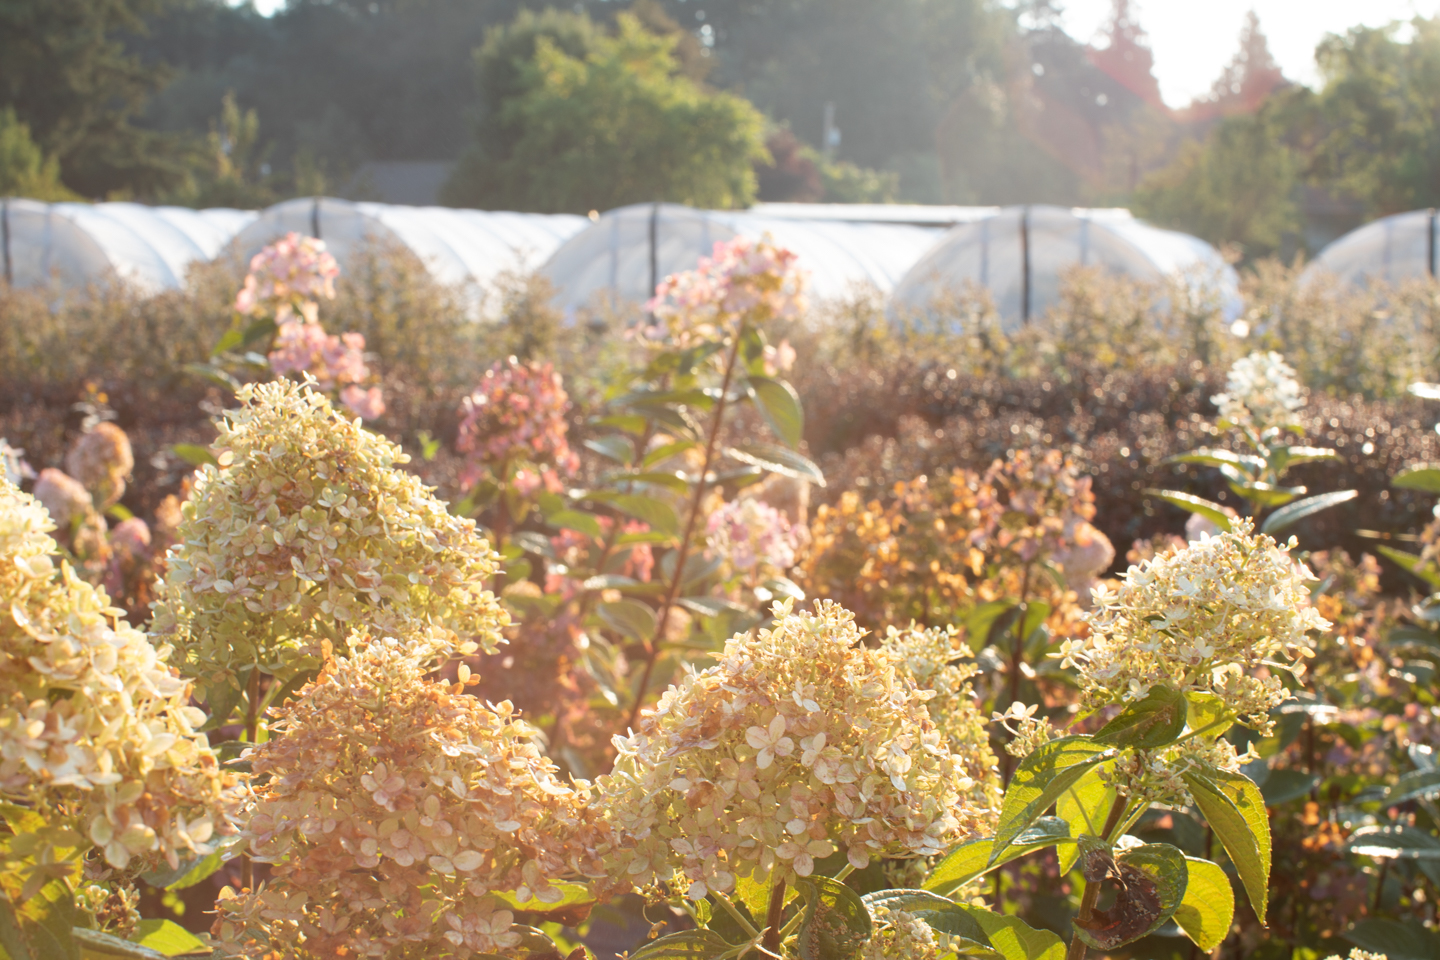 Hydrangea blooms with greenhouses in background